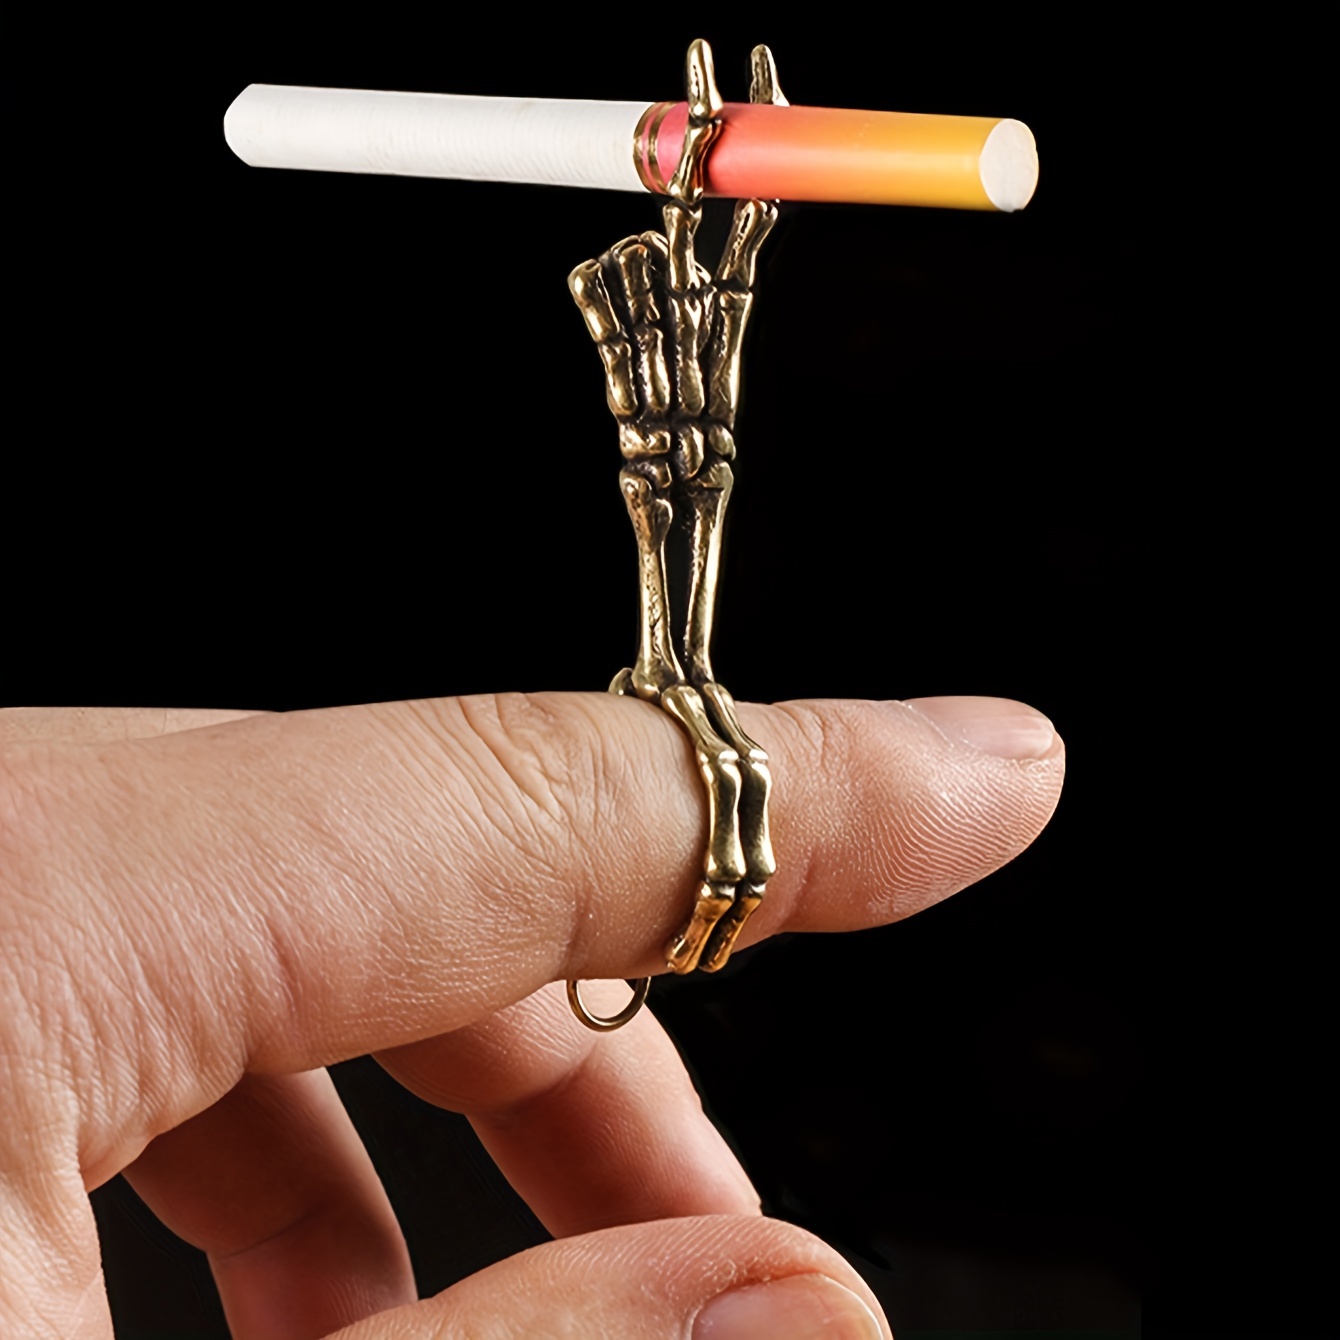 1pc Creative Smoker's Ring With Cigarette Holder, Hip-hop Style